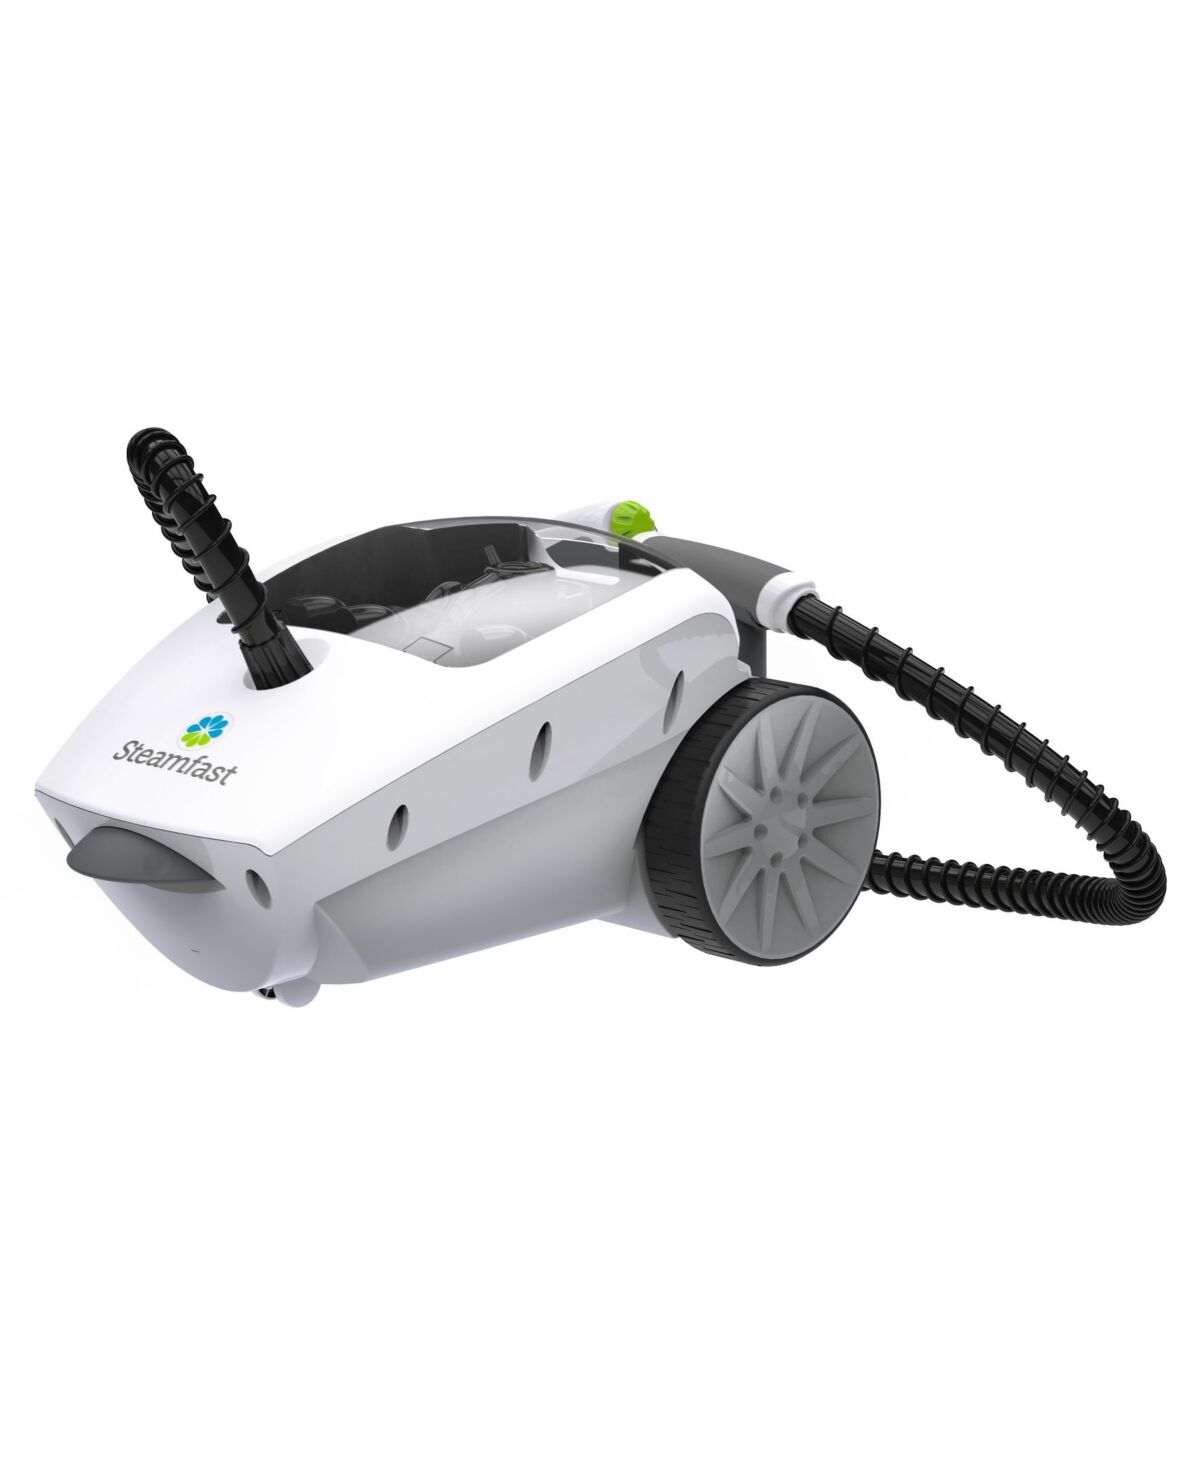 Steamfast 375 Deluxe Canister Steam Cleaner - White